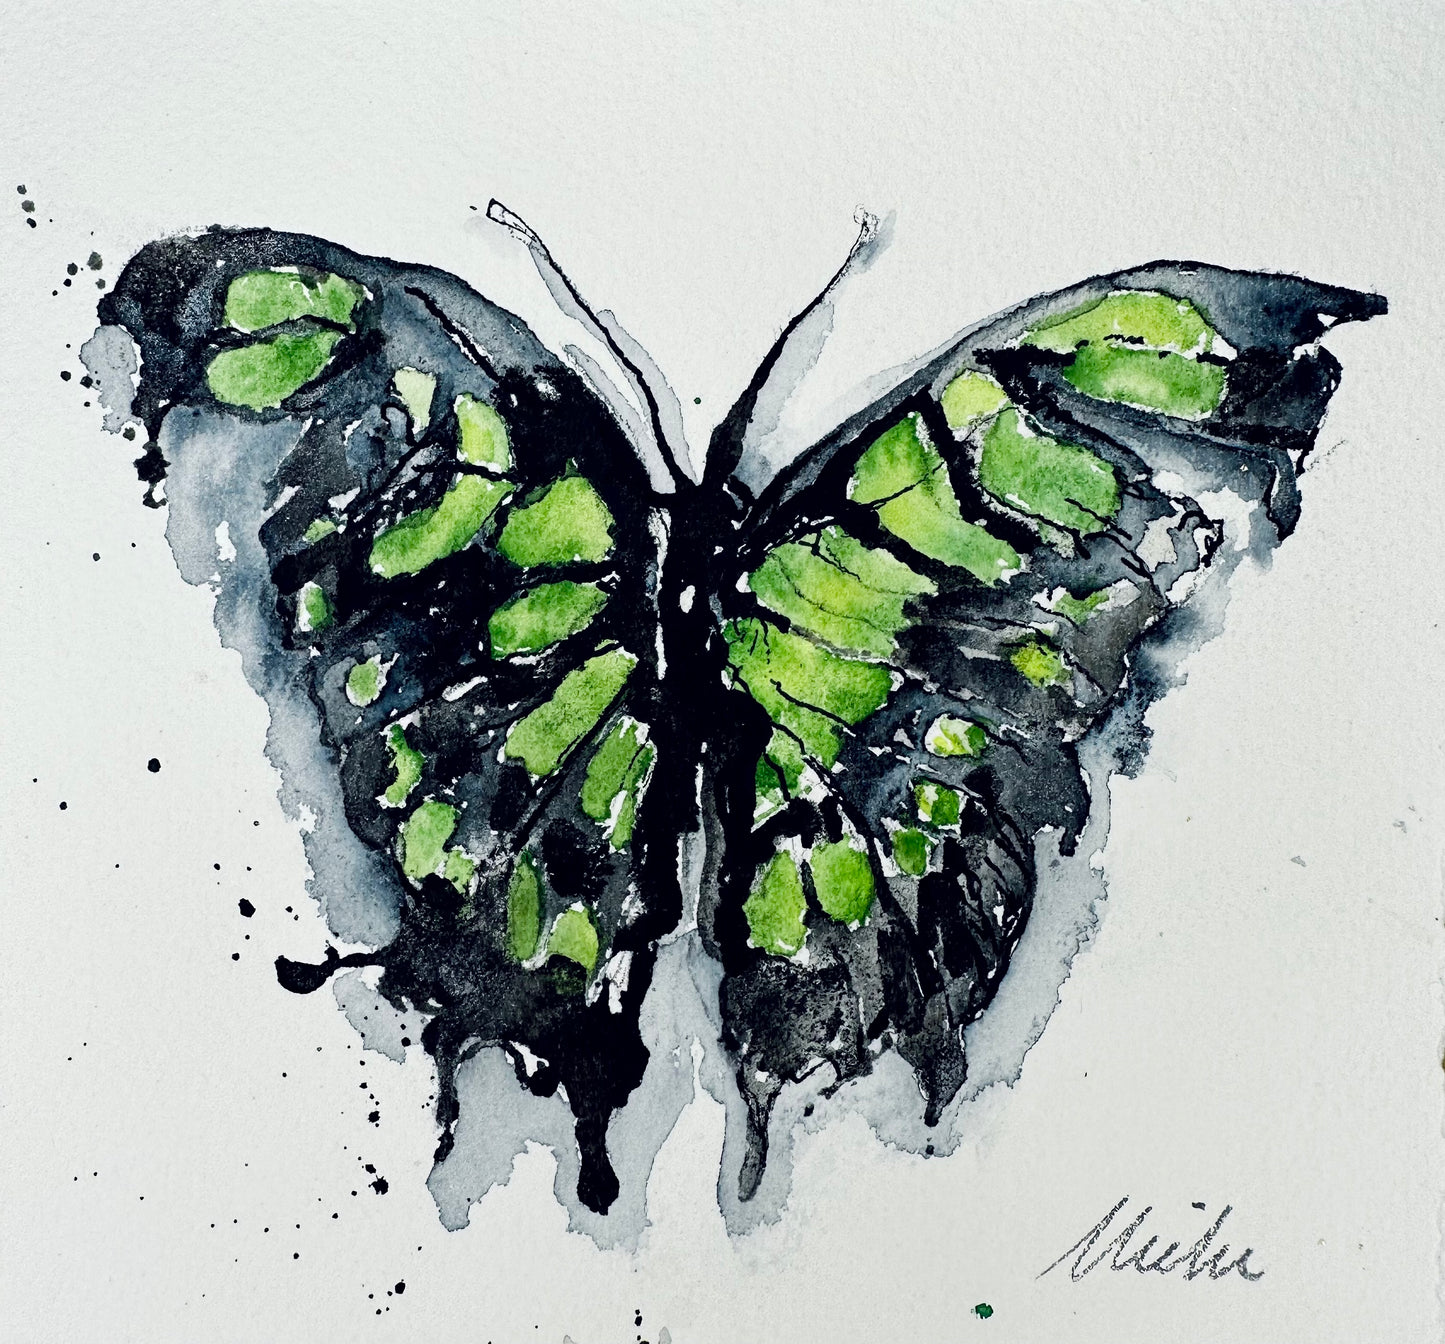 Philaethria dido / Longwing butterfly / Green Butterfly